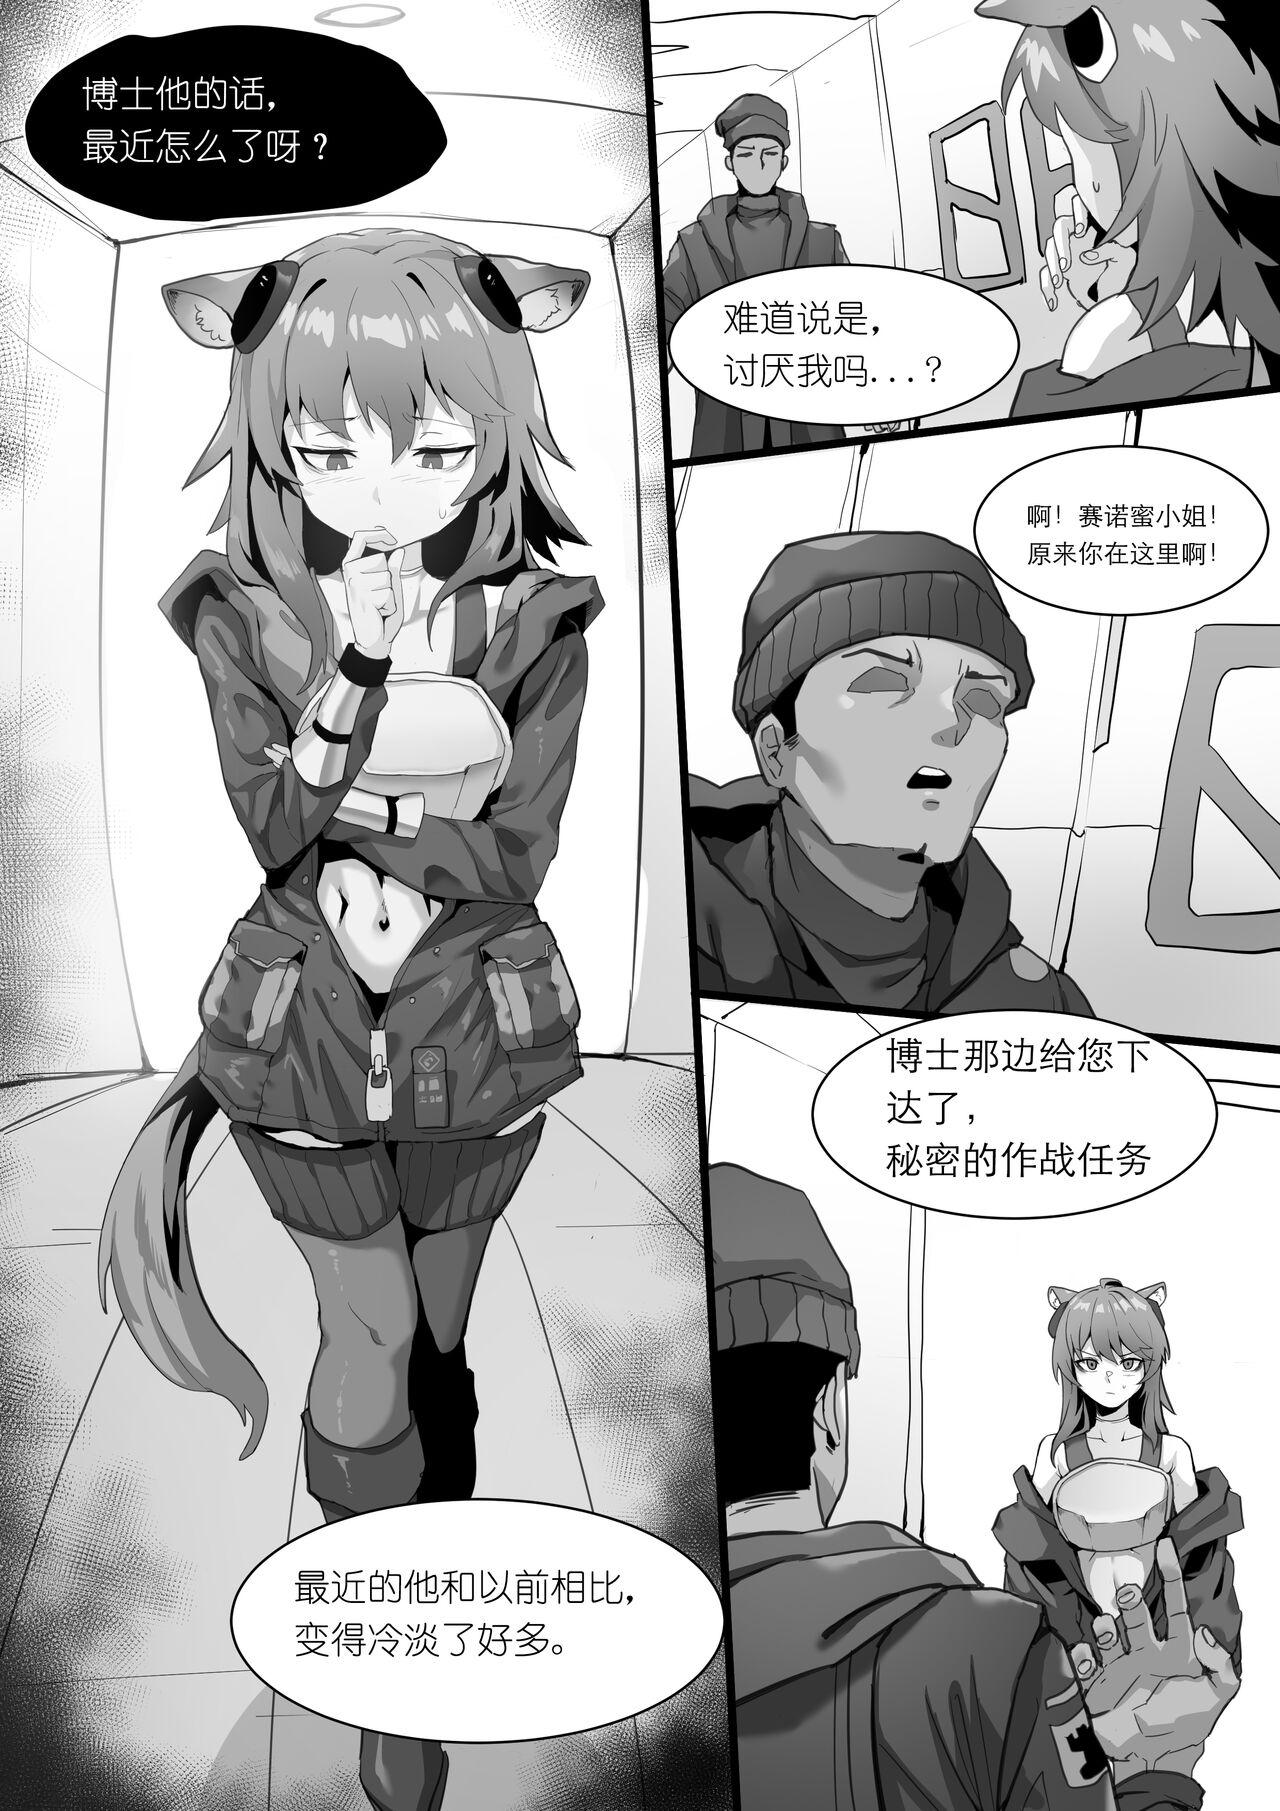 Pounded 欲望方舟记录3 - Arknights Lesbiansex - Page 6